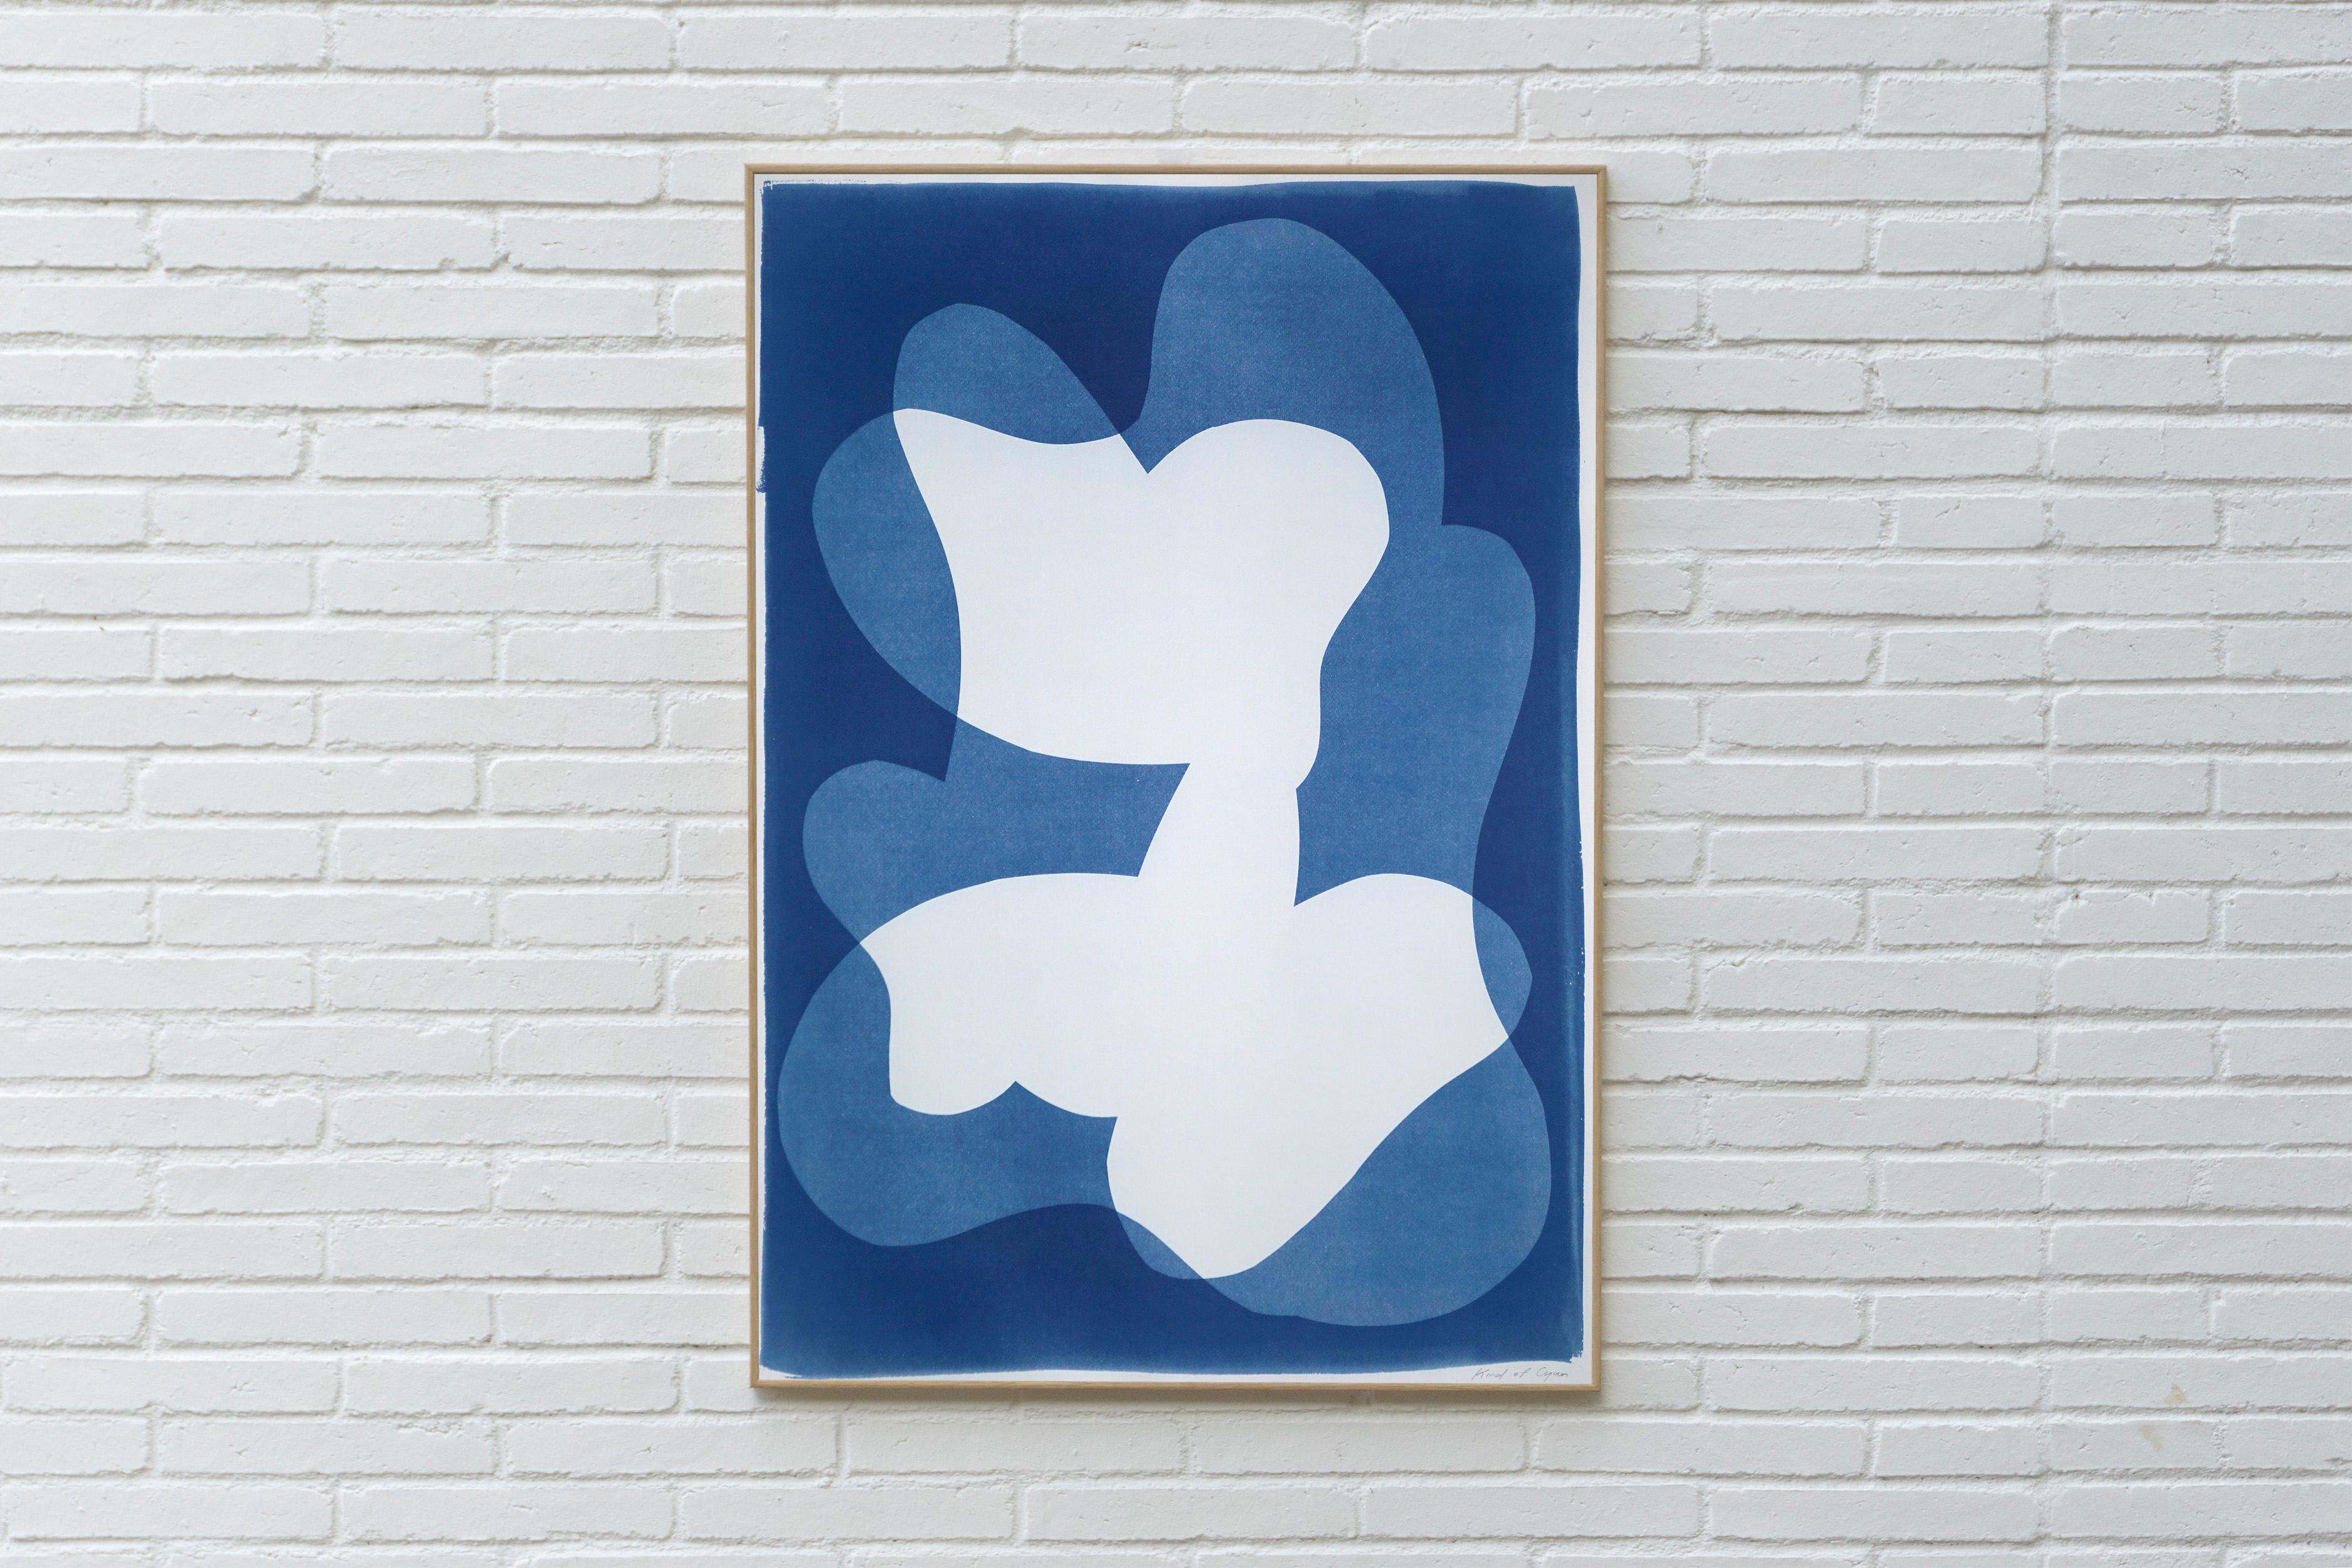 This is an exclusive handprinted unique cyanotype that takes its inspiration from the mid-century modern shapes.
It's made by layering paper cutouts and different exposures using uv-light. 

Details:
+ Title: Fat Finger
+ Year: 2022
+ Stamped and